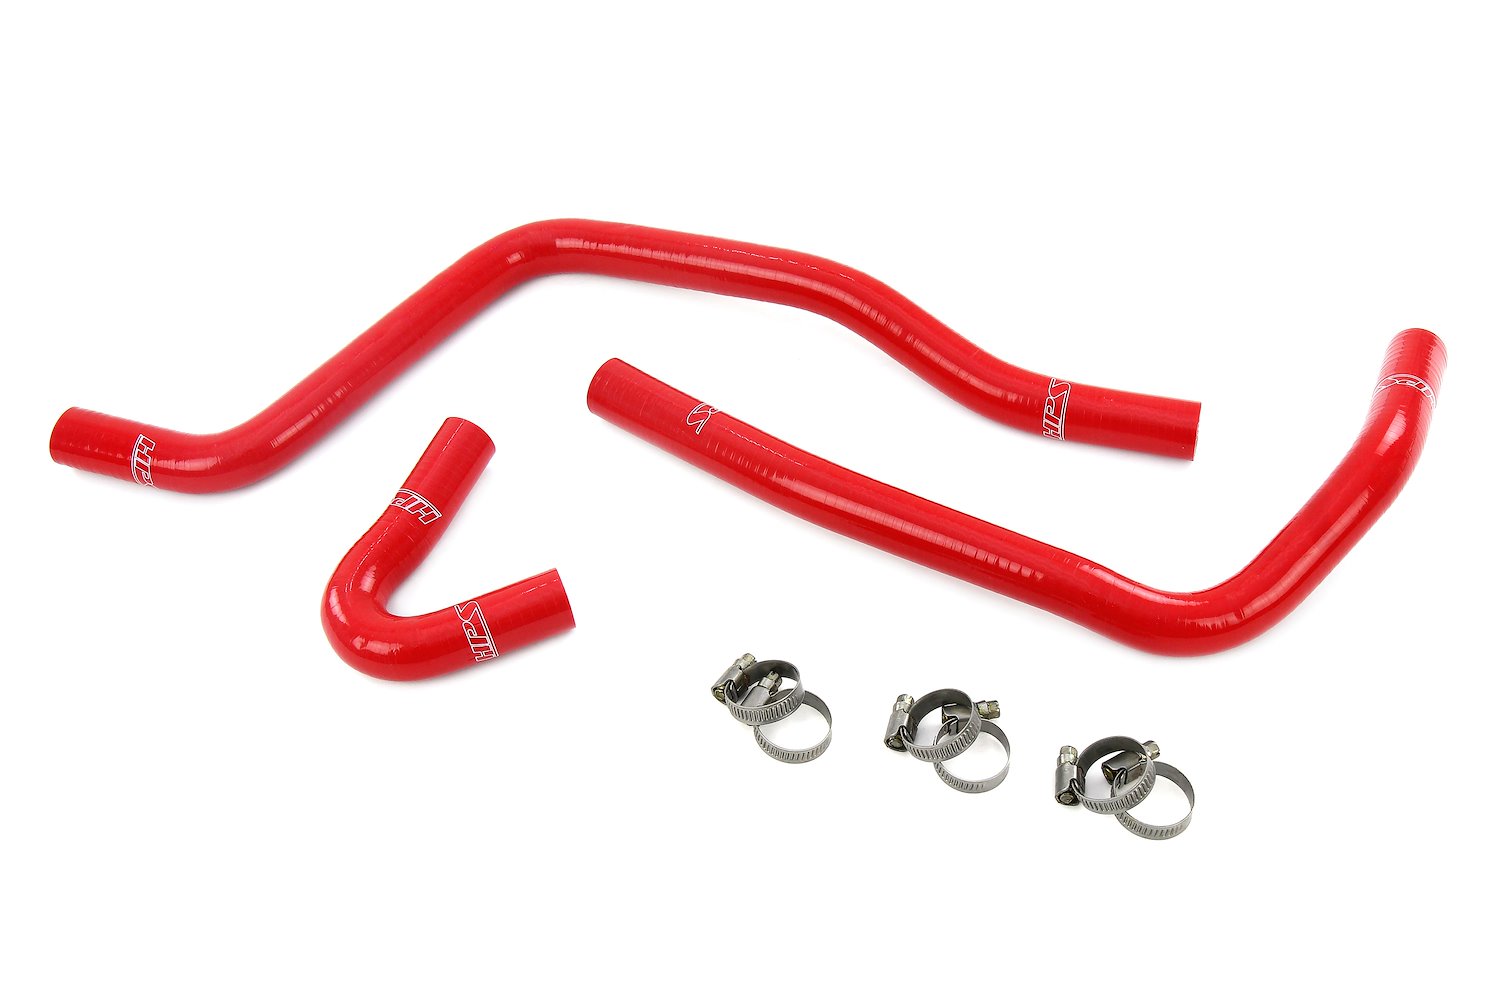 57-2120-RED Heater Hose Kit, 3-Ply Reinforced Silicone, Replaces OEM Rubber Heater Coolant Hoses